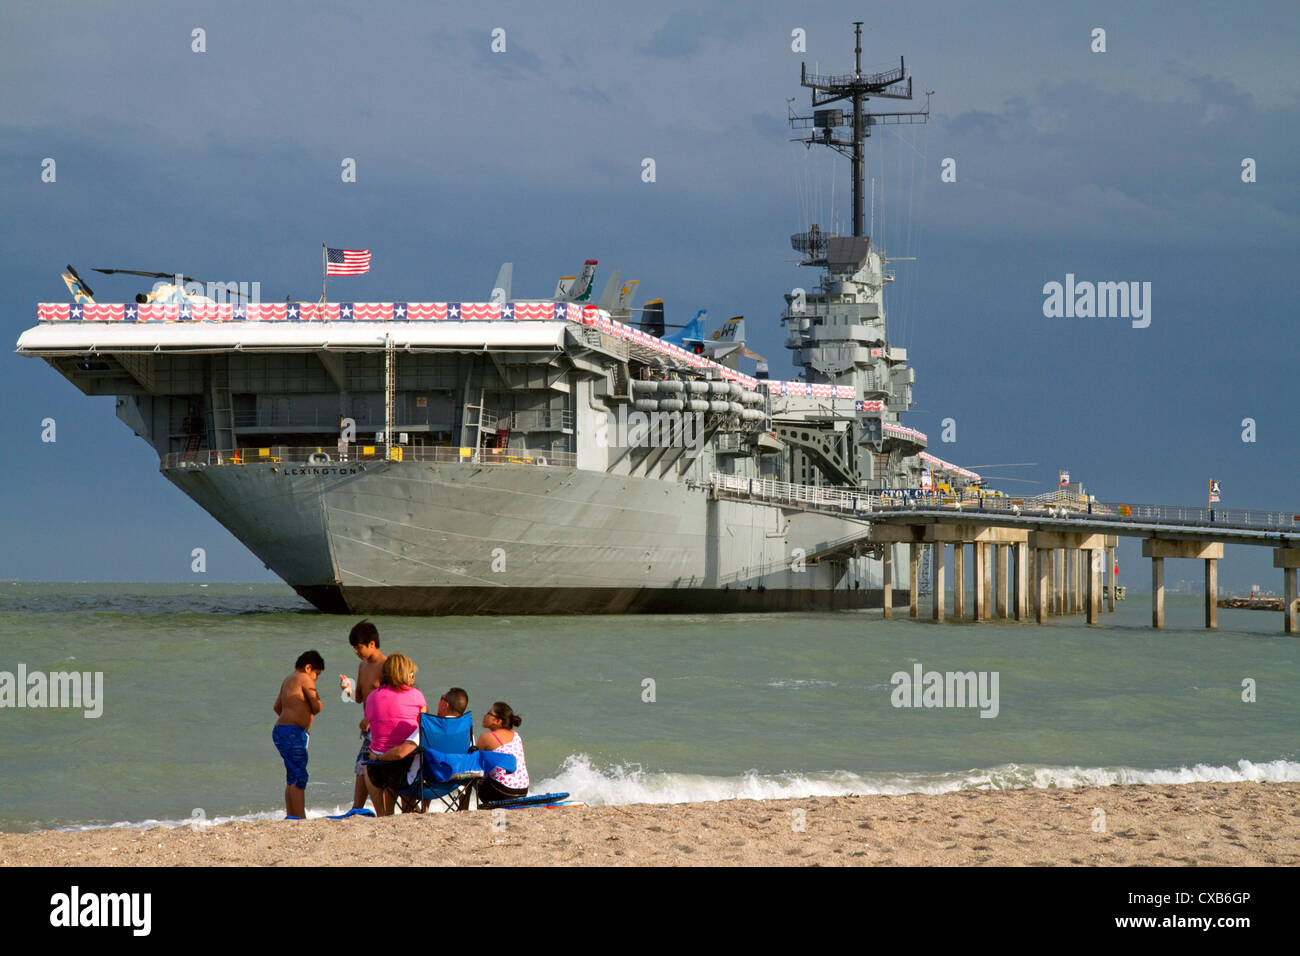 The USS Lexington, Essex-class aircraft carrier is a museum ship located in the bay at Corpus Christi, Texas, USA. Stock Photo